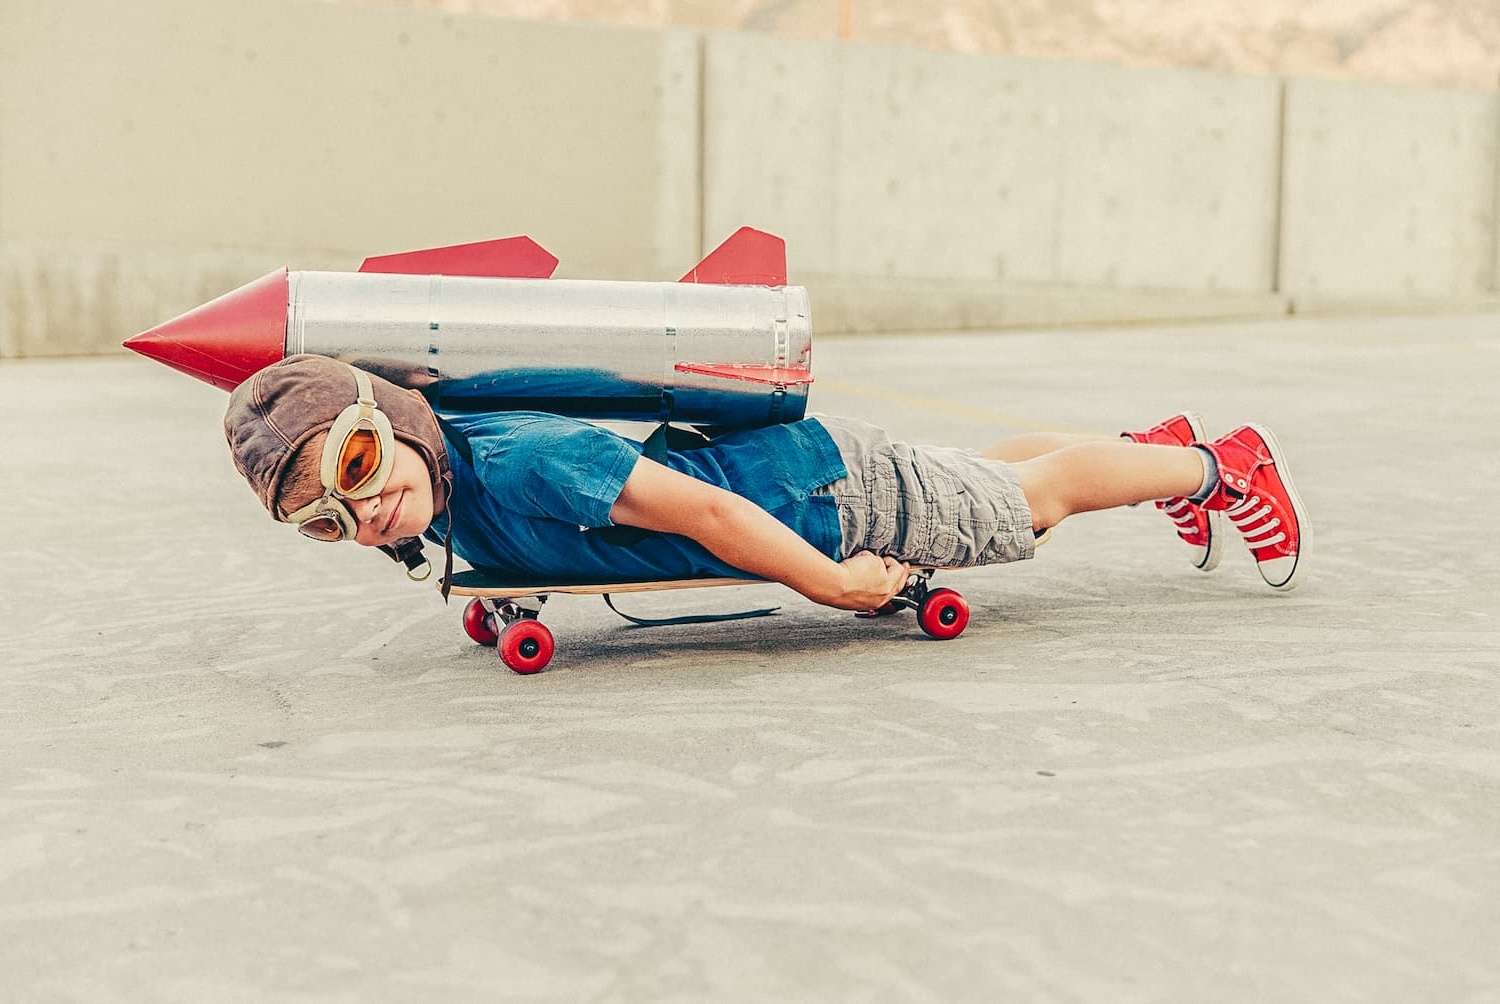 Boy rides a skateboard while wearing a toy rocket pack on his back.